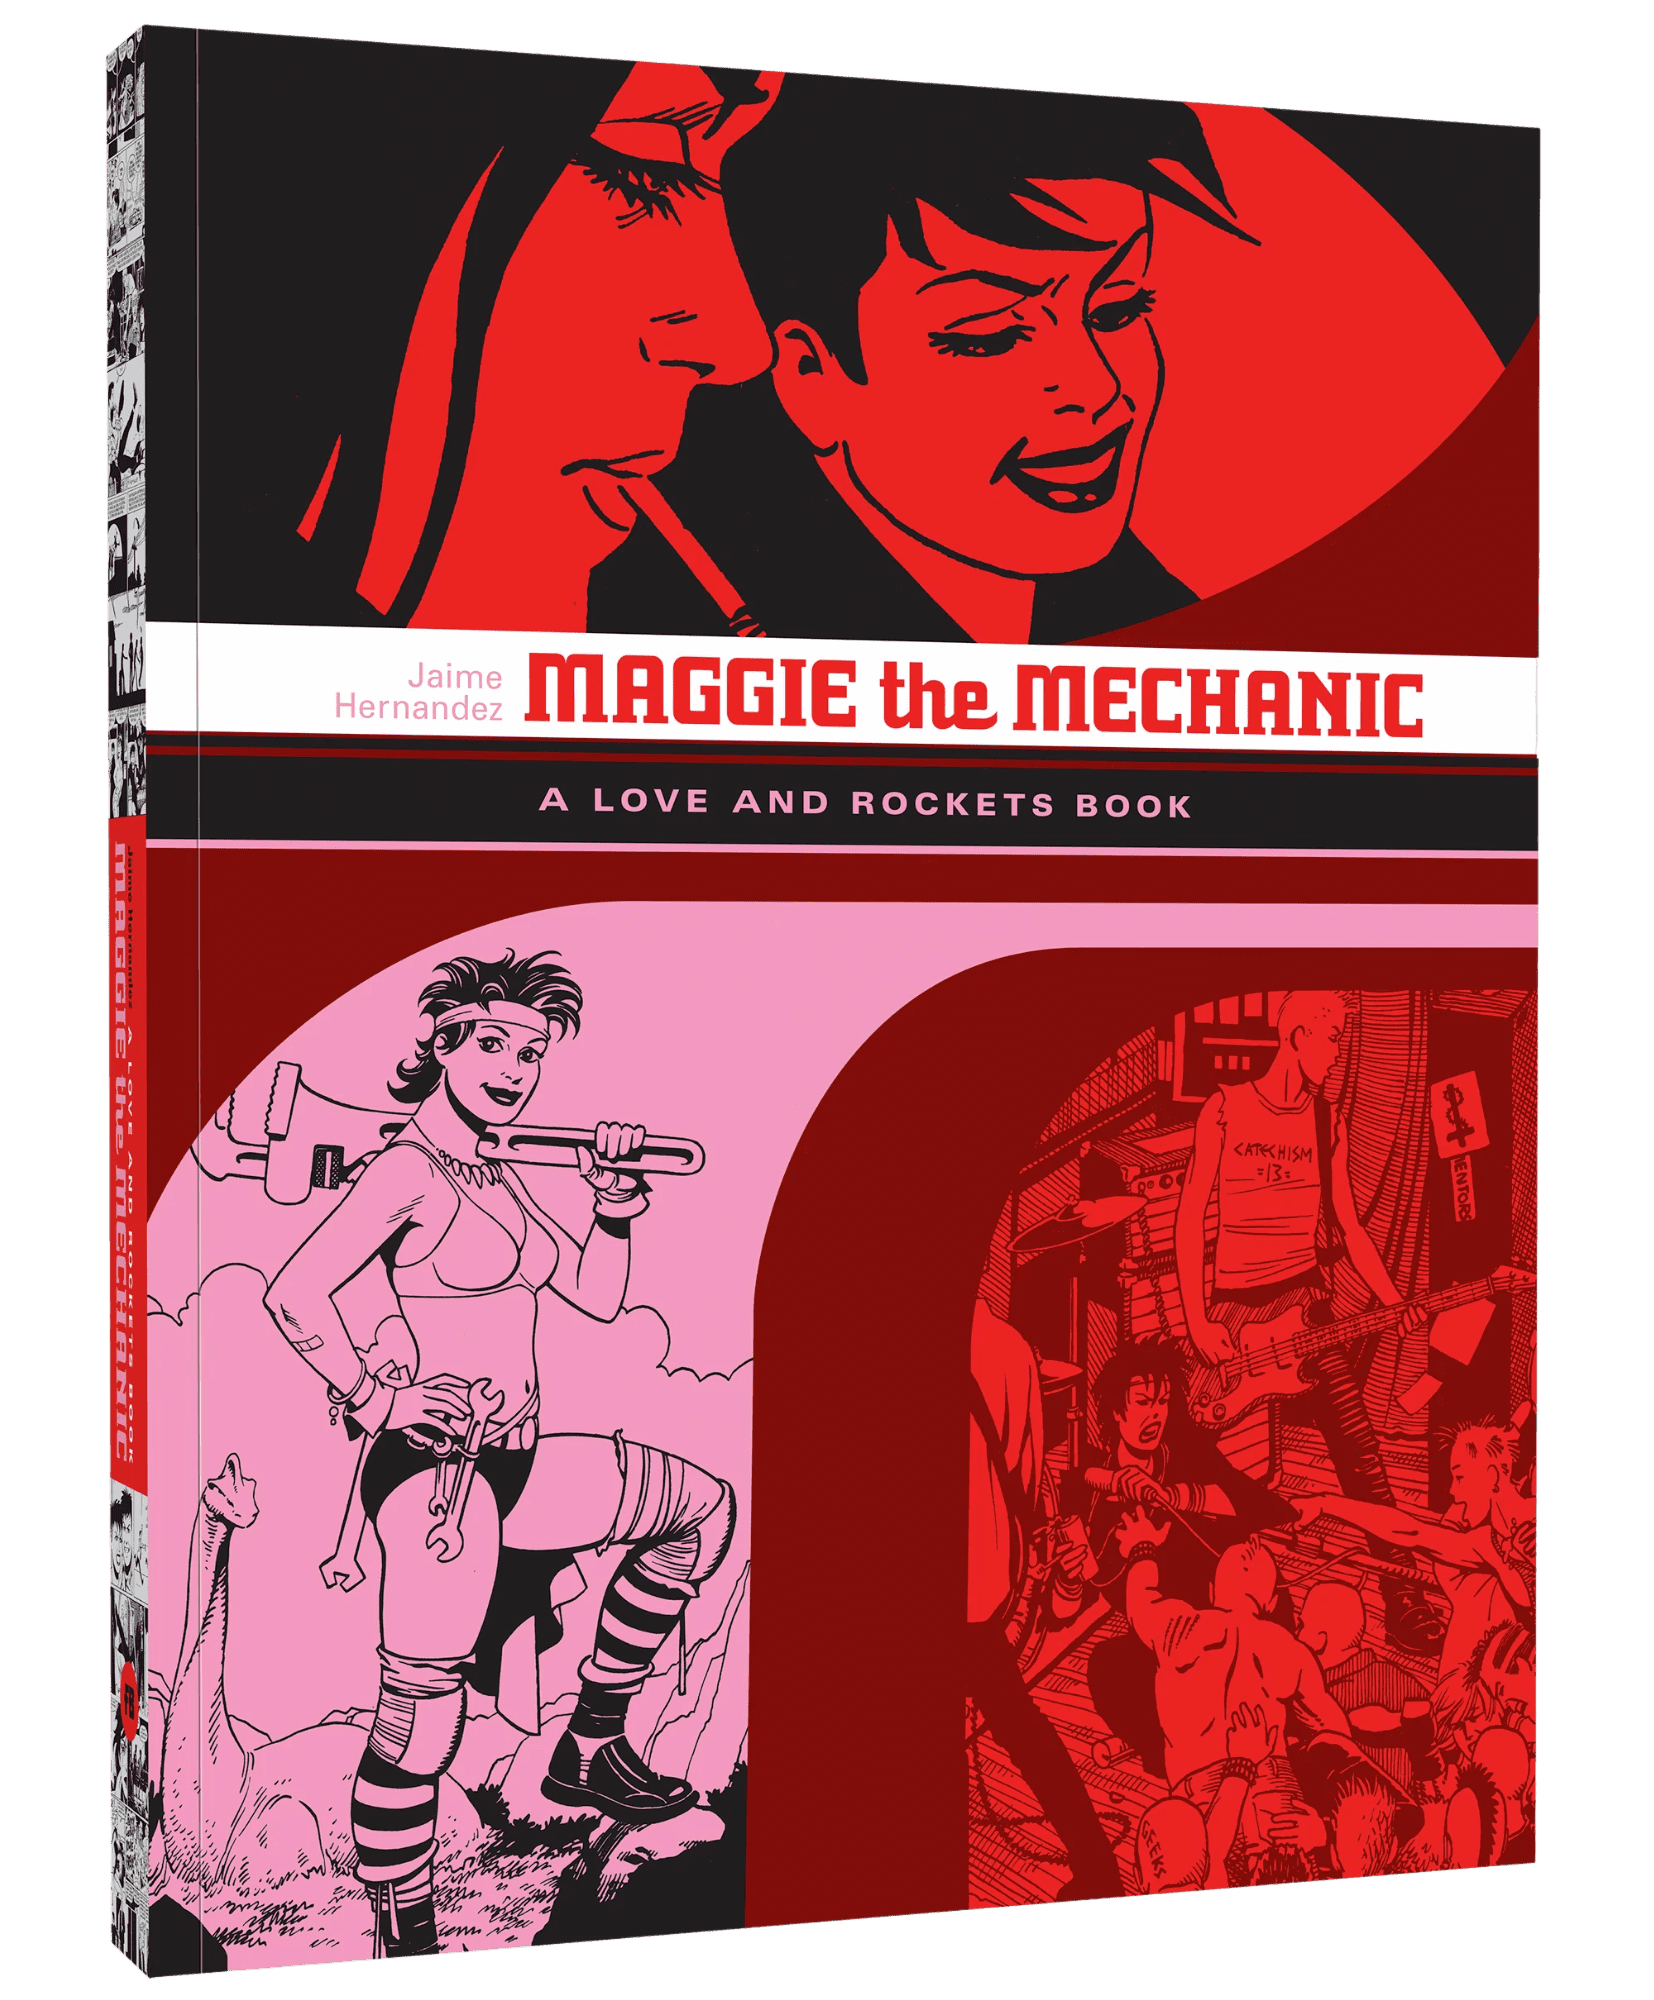 Maggie the Mechanic book cover